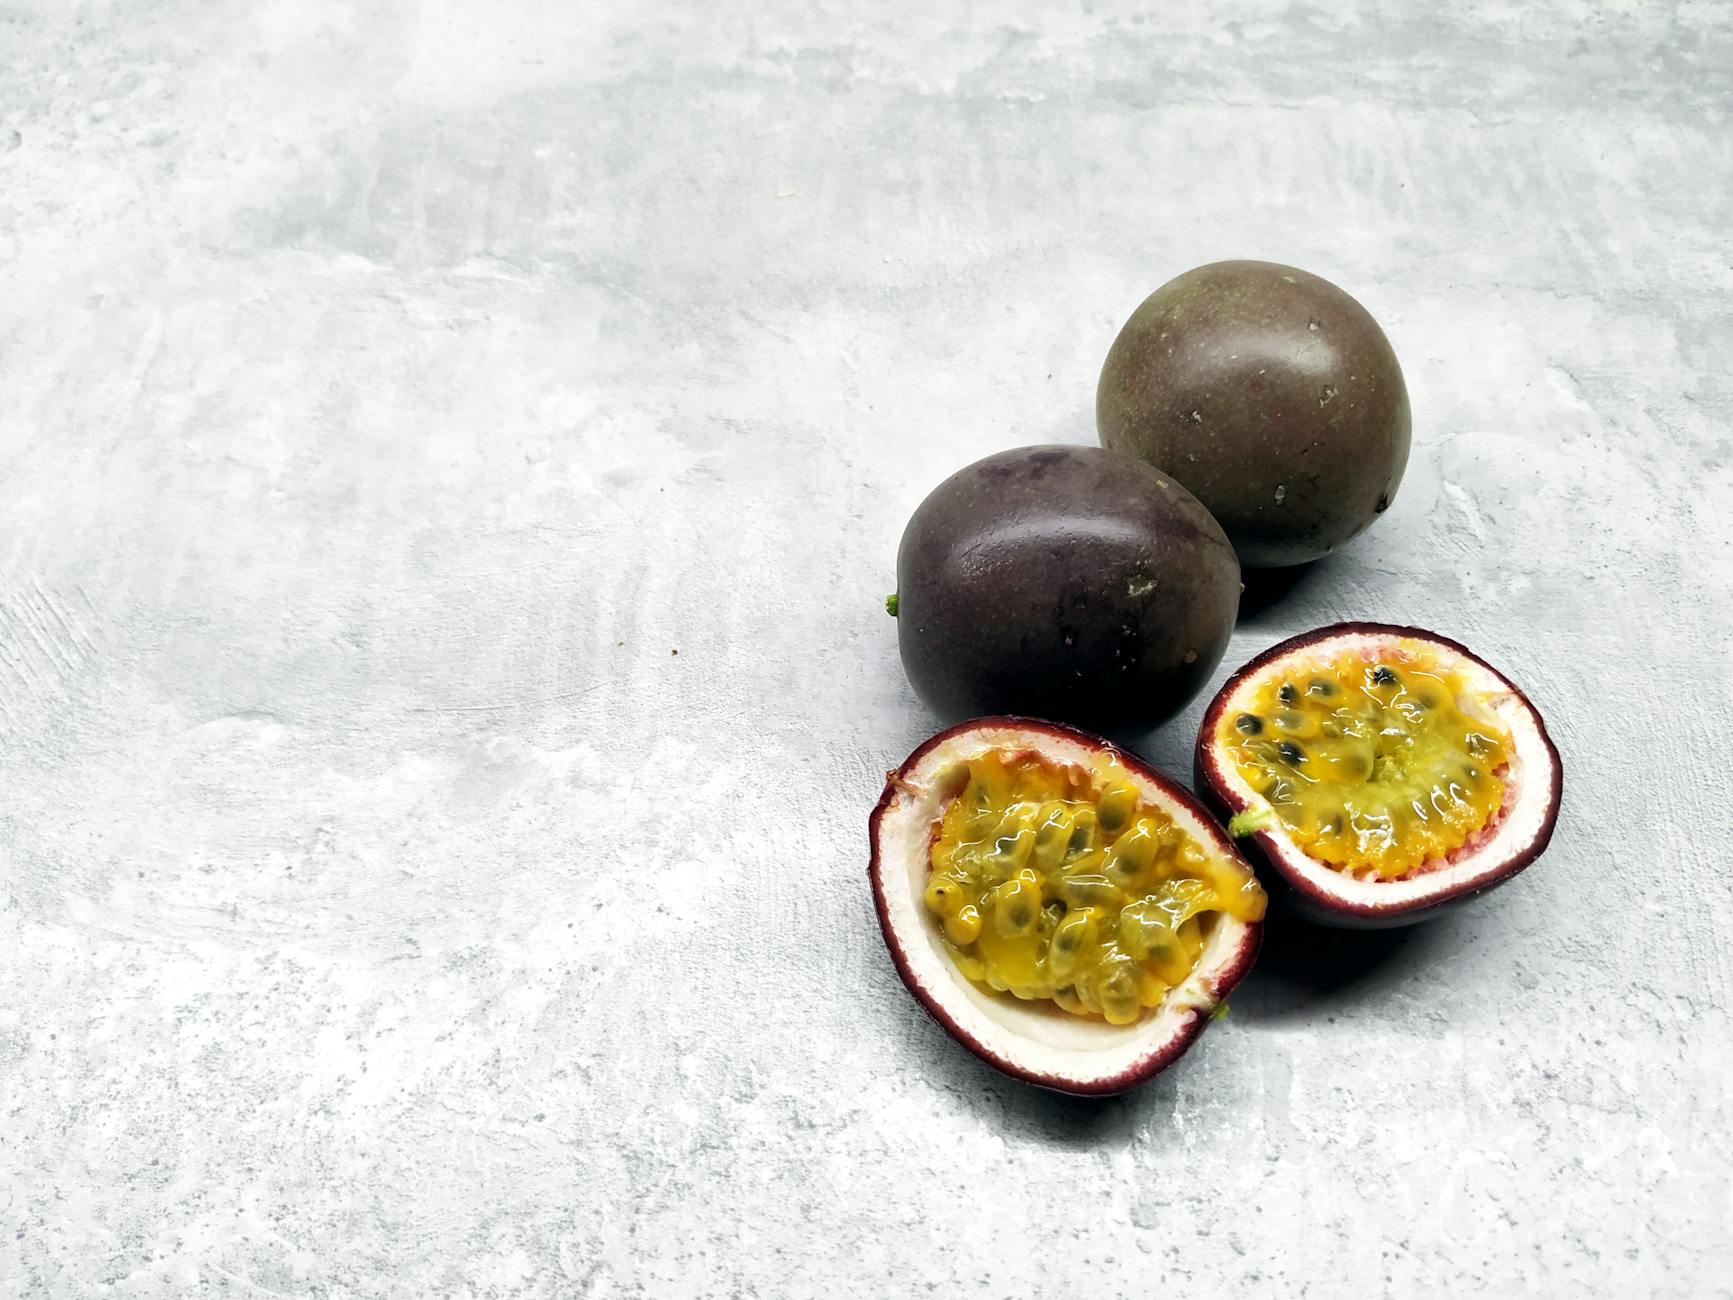 a sliced passion fruit on a flat surface